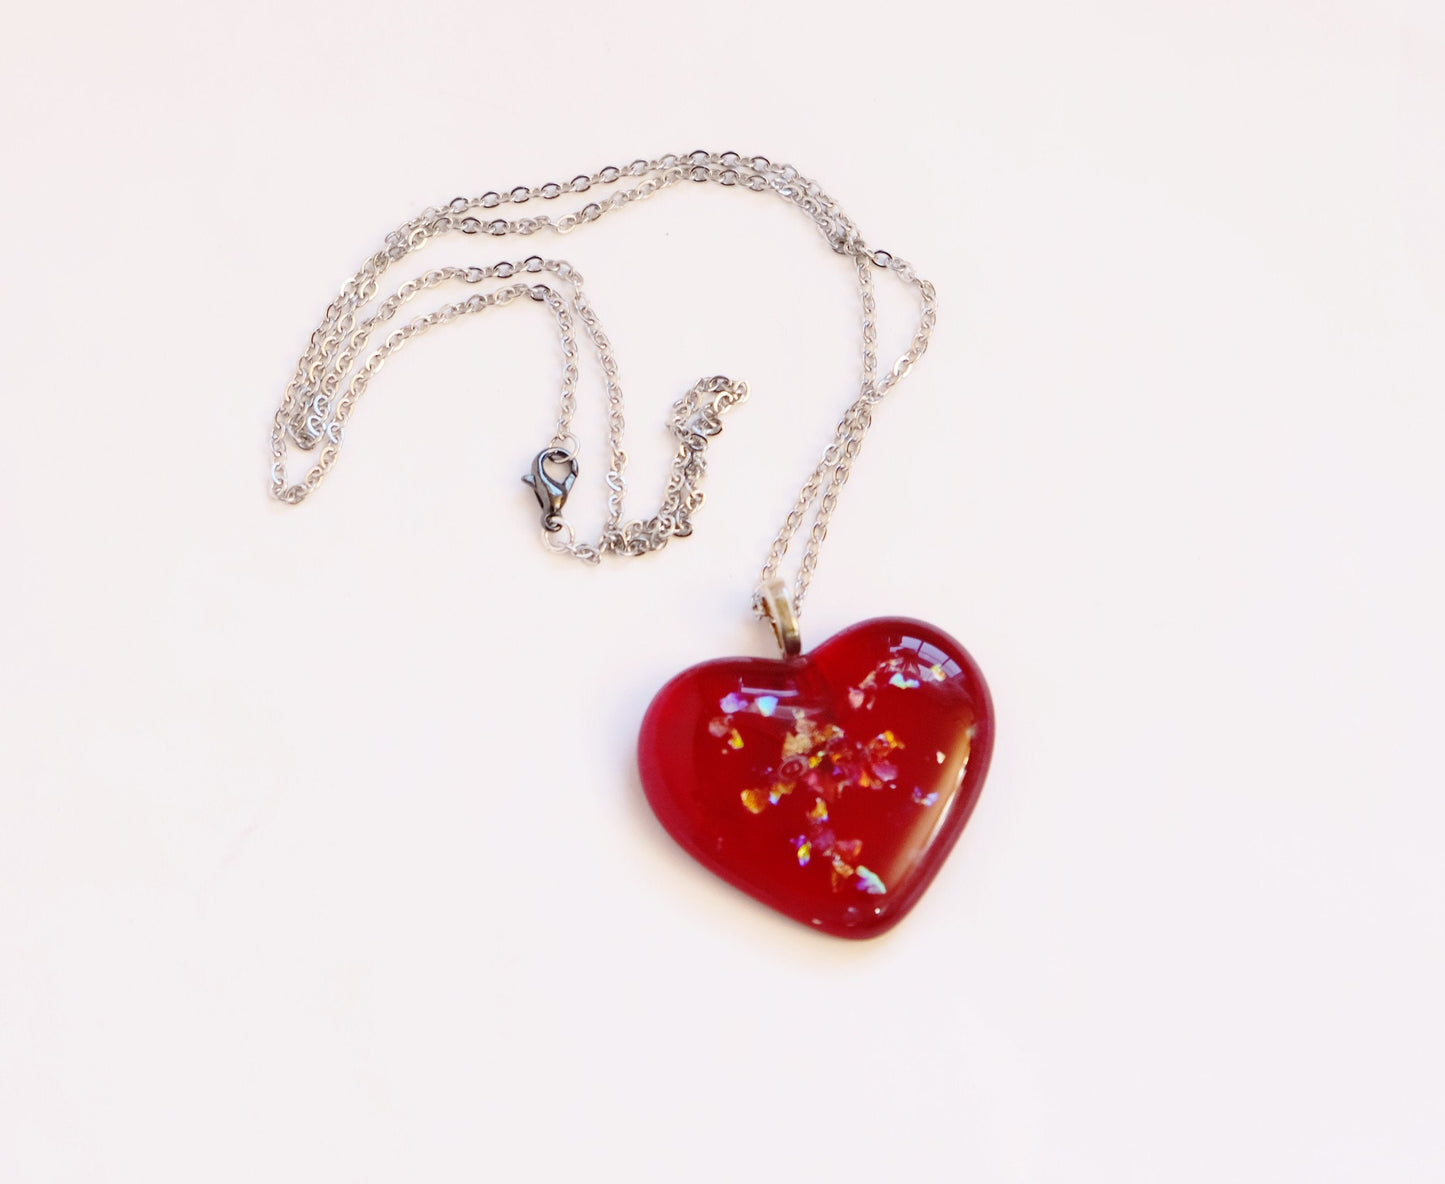 Red Sparkle Heart fused glass pendant necklace, dichroic accents,18 inch stainless steel chain